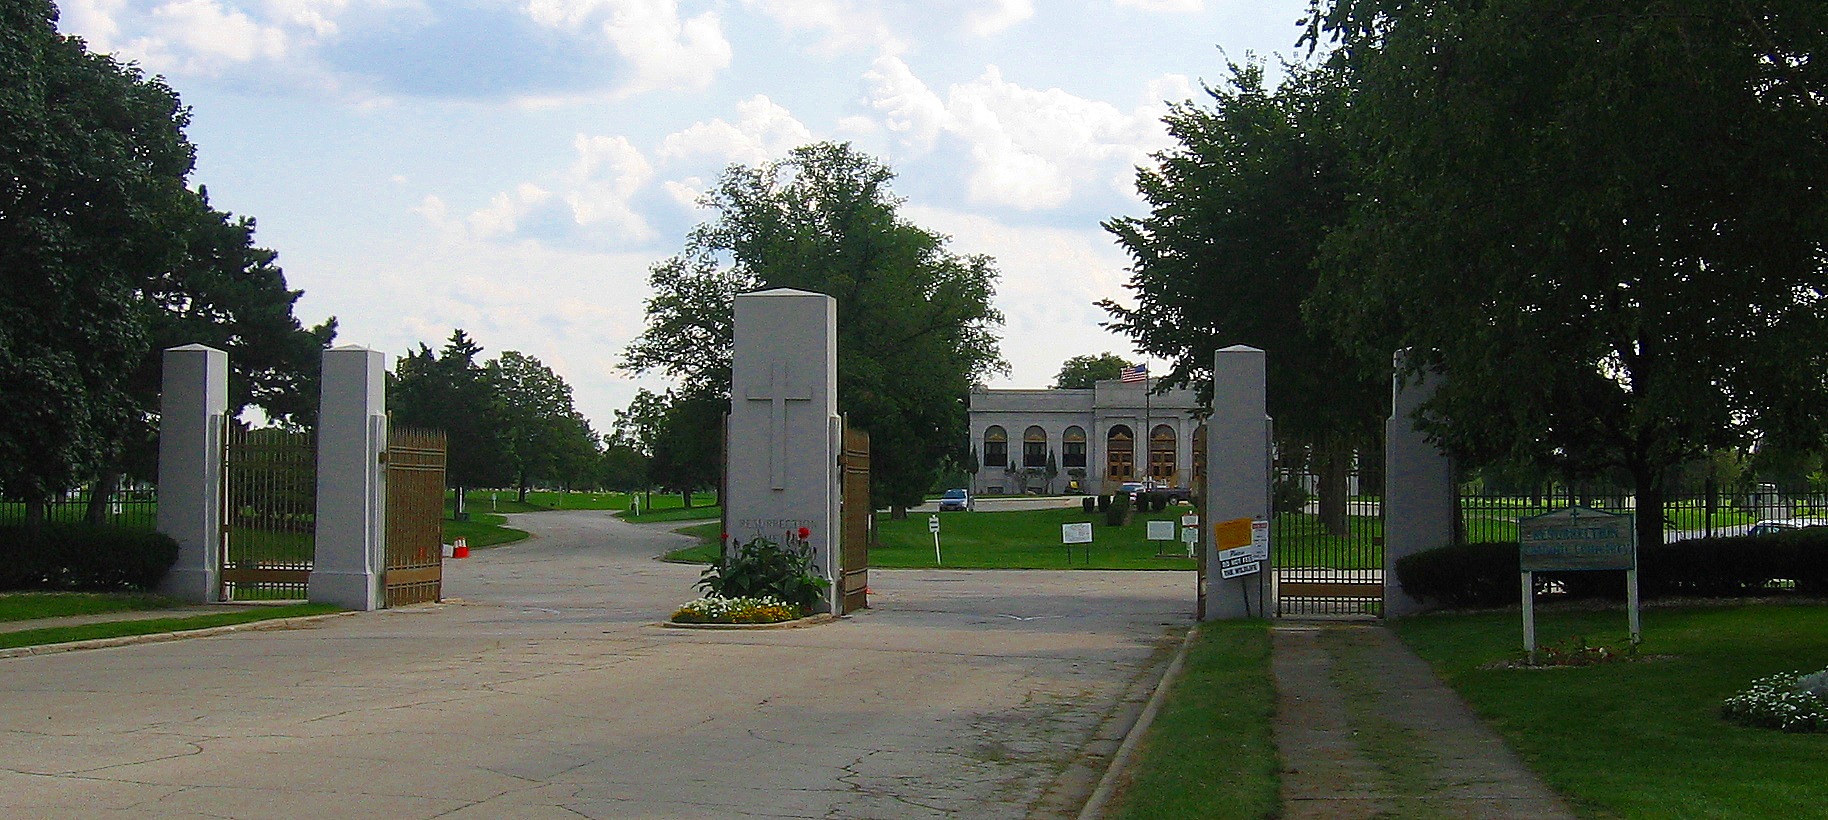  Front gate of Resurrection Cemetery, photo by " MrHarman" &nbsp;at the &nbsp;  English language Wikipedia &nbsp;under &nbsp; Creative Commons &nbsp; Attribution-Share Alike 3.0 Unported  